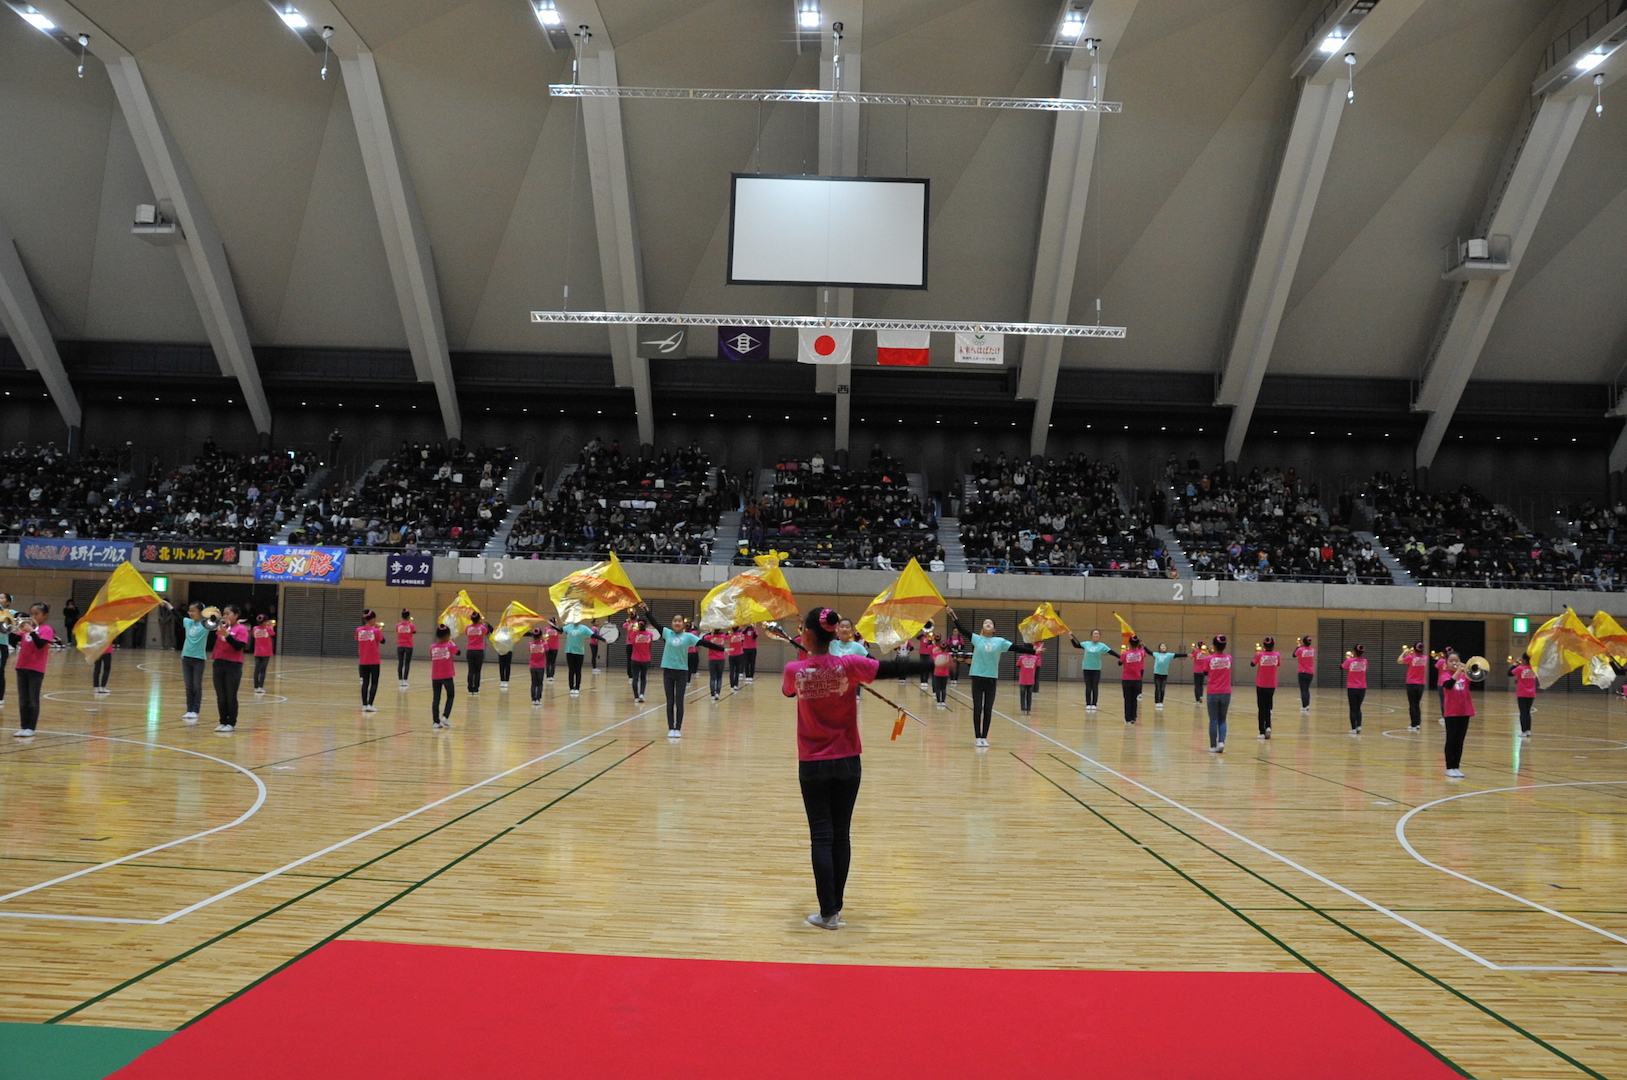 Takasaki Arena Opening Ceremony<br />Performed by<br />The Takasaki Technical Leaders Marching Band 1